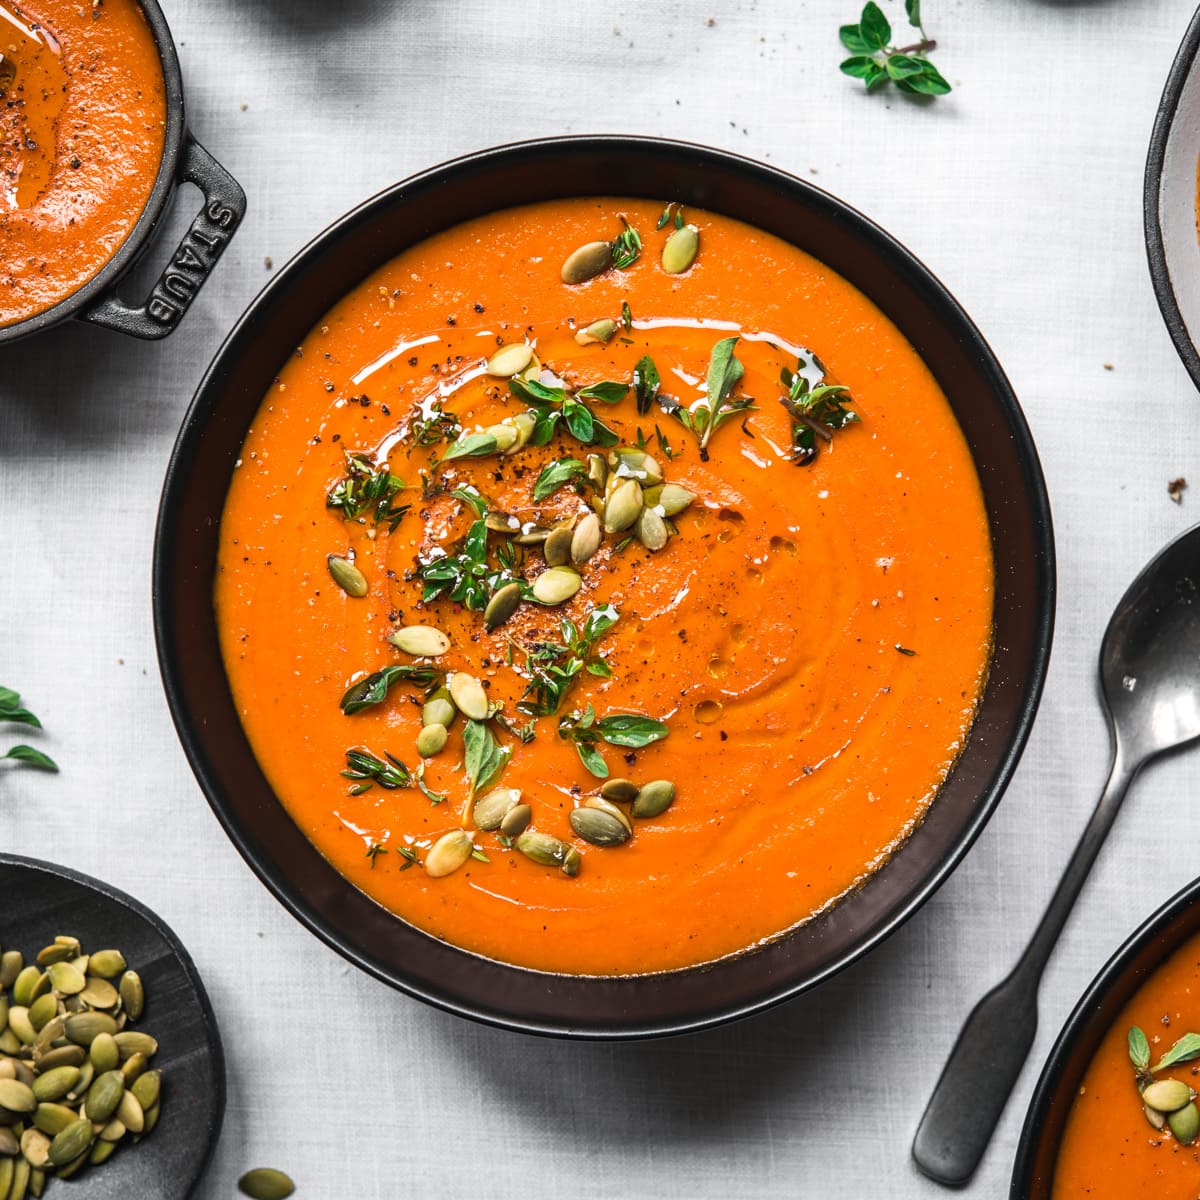 https://www.crowdedkitchen.com/wp-content/uploads/2020/10/roasted-red-pepper-soup-8.jpg